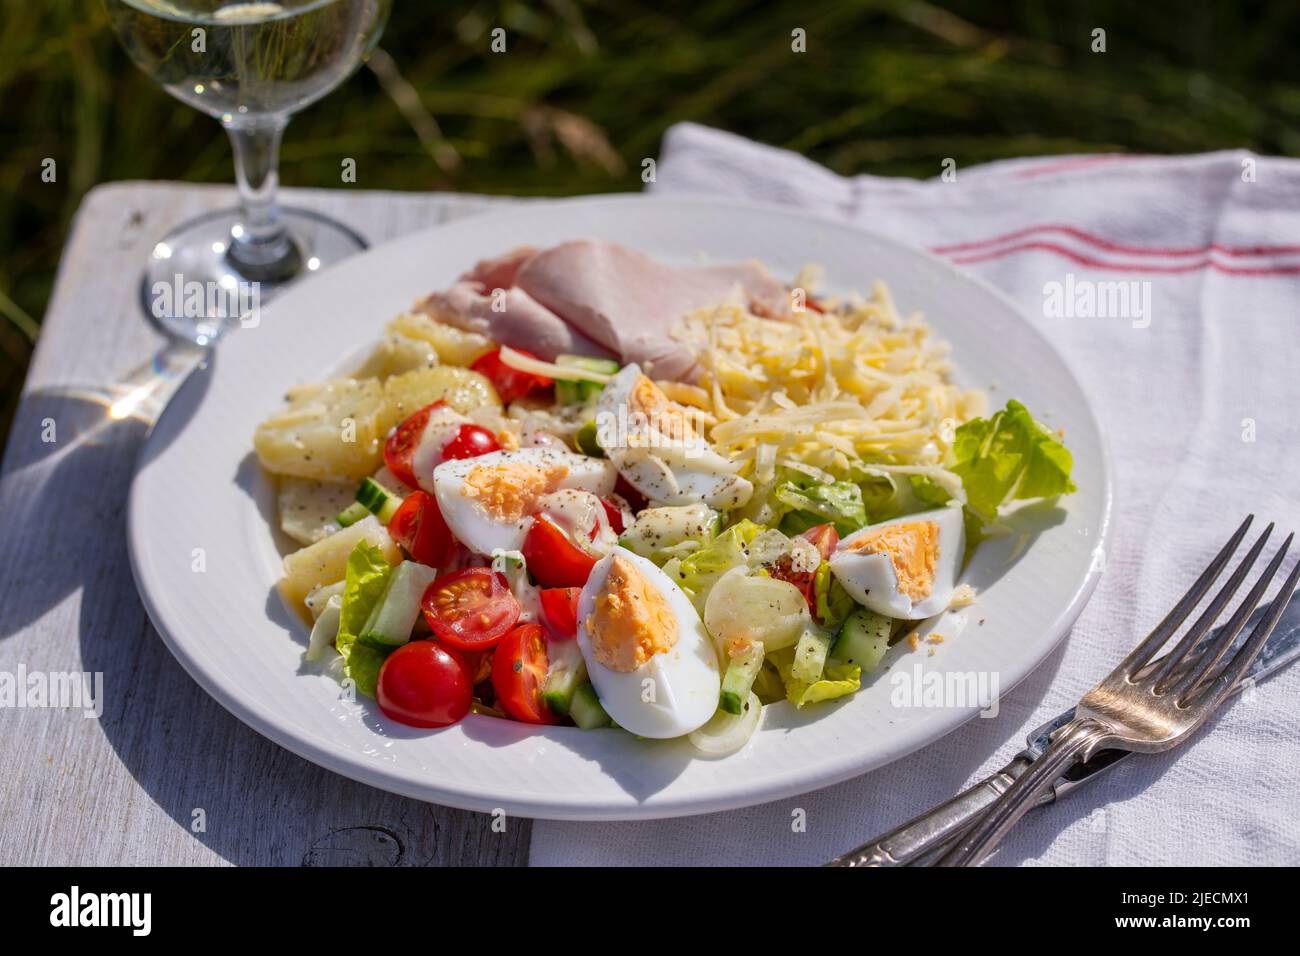 Simple summer meal with potatoes, salad, egg, cheese and ham Stock Photo